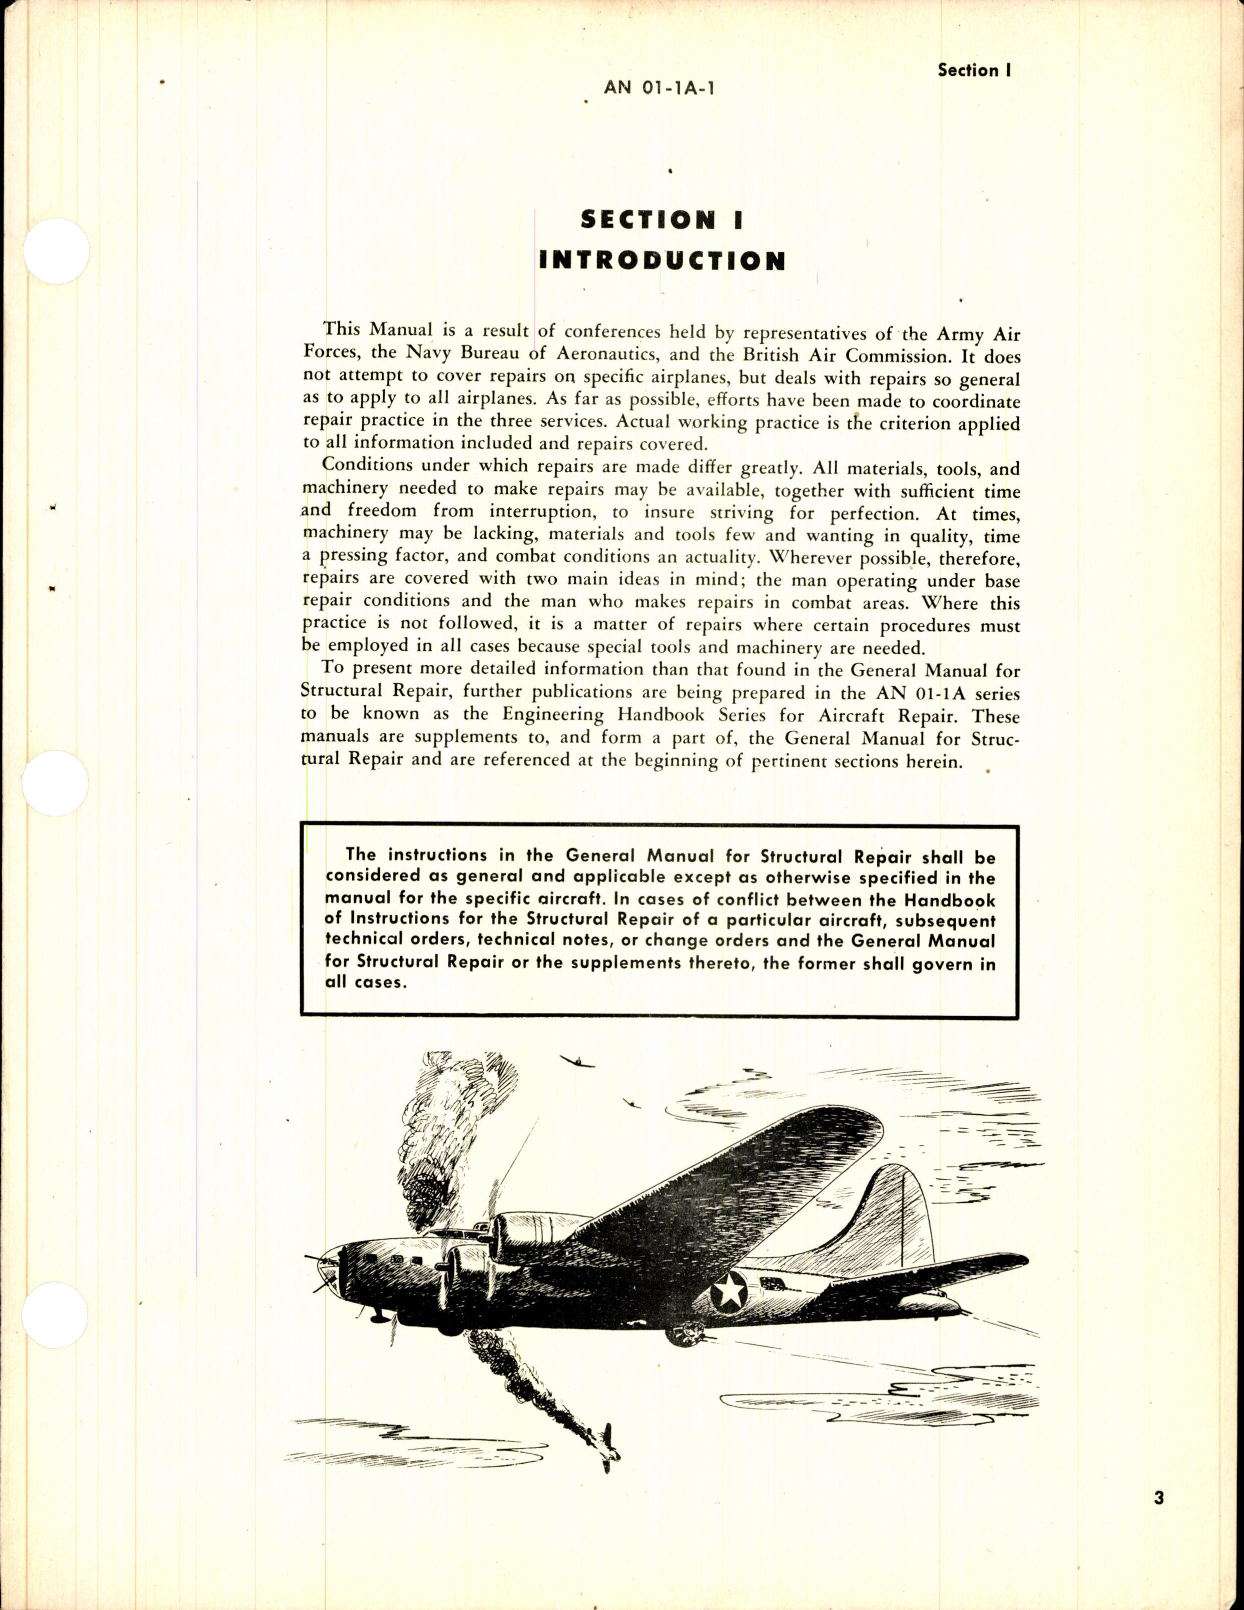 Sample page 5 from AirCorps Library document: General Manual for Structural Repair